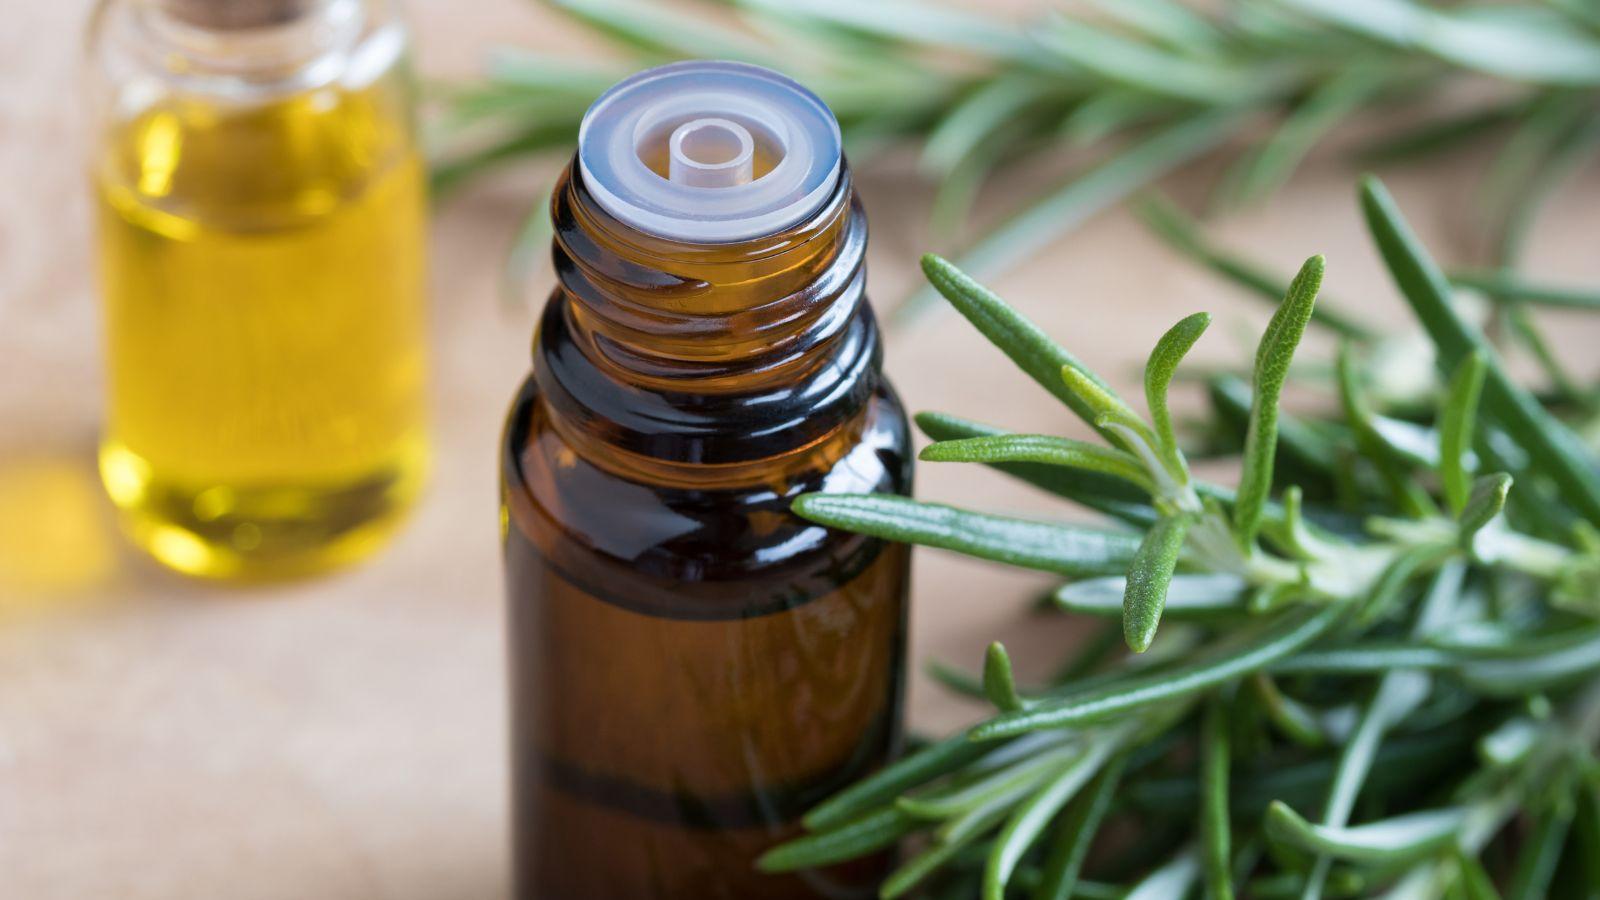 Rosemary essential oil aromatherapy